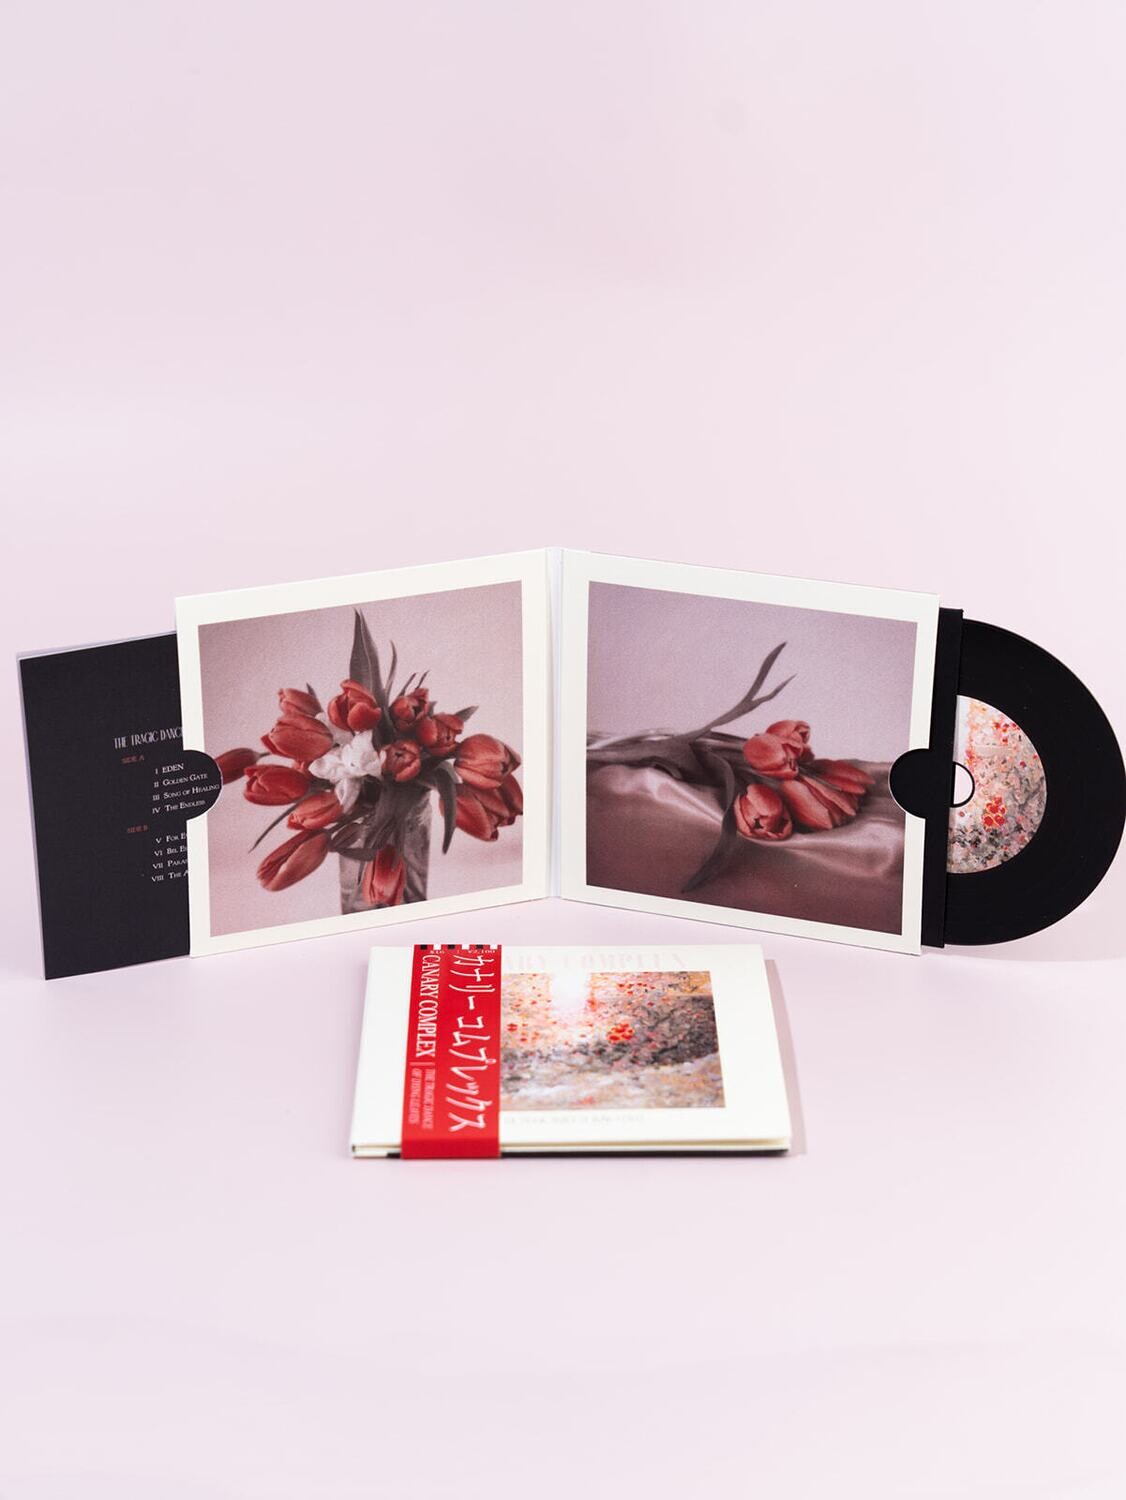 The Tragic Dance of Dying Leaves LIMITED EDITION Gatefold Vinyl CD